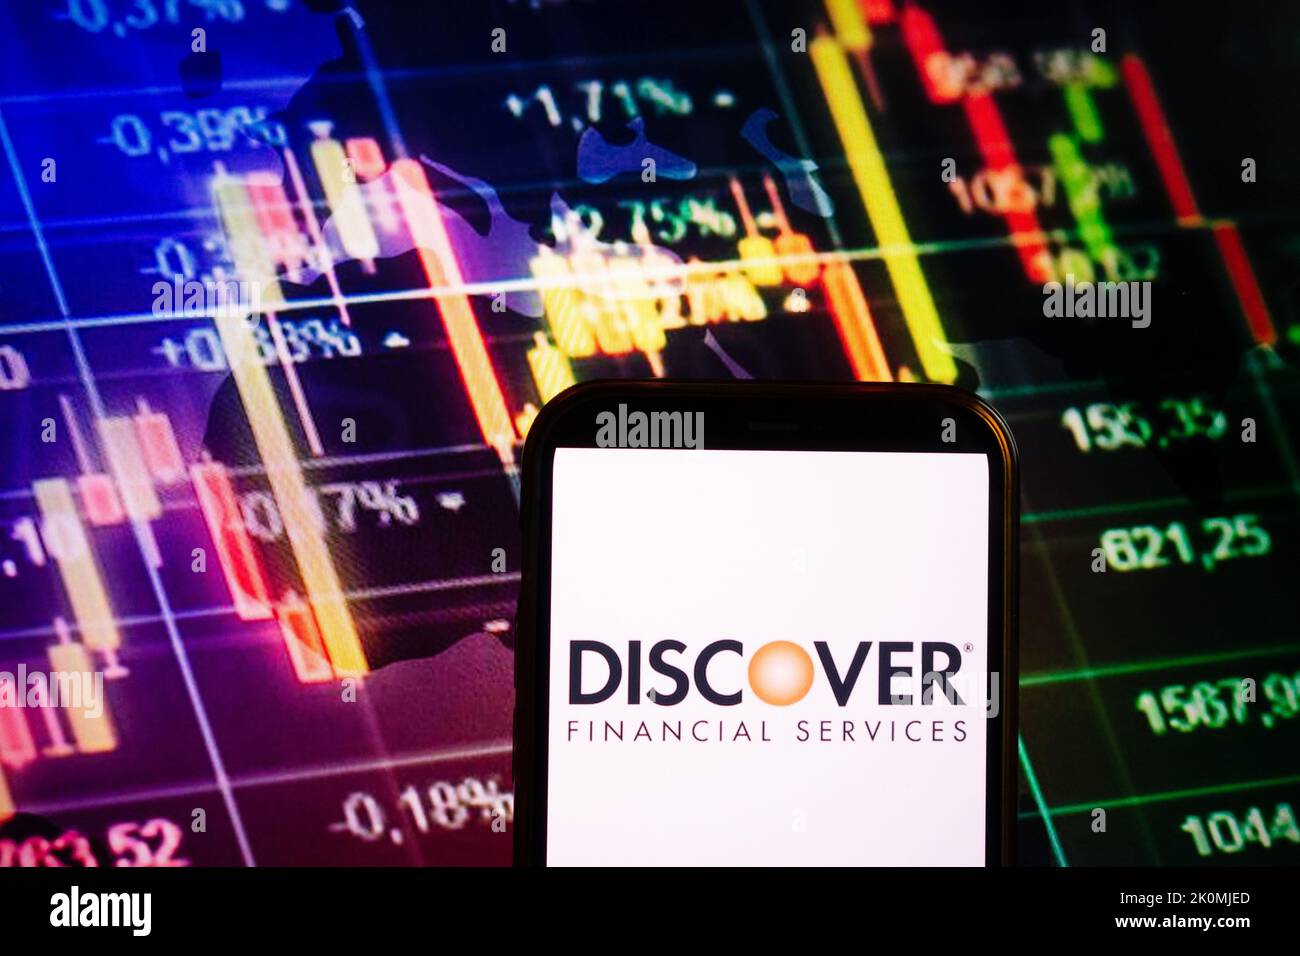 KONSKIE, POLAND - September 10, 2022: Smartphone displaying logo of Discover Financial Services company on stock exchange diagram background Stock Photo